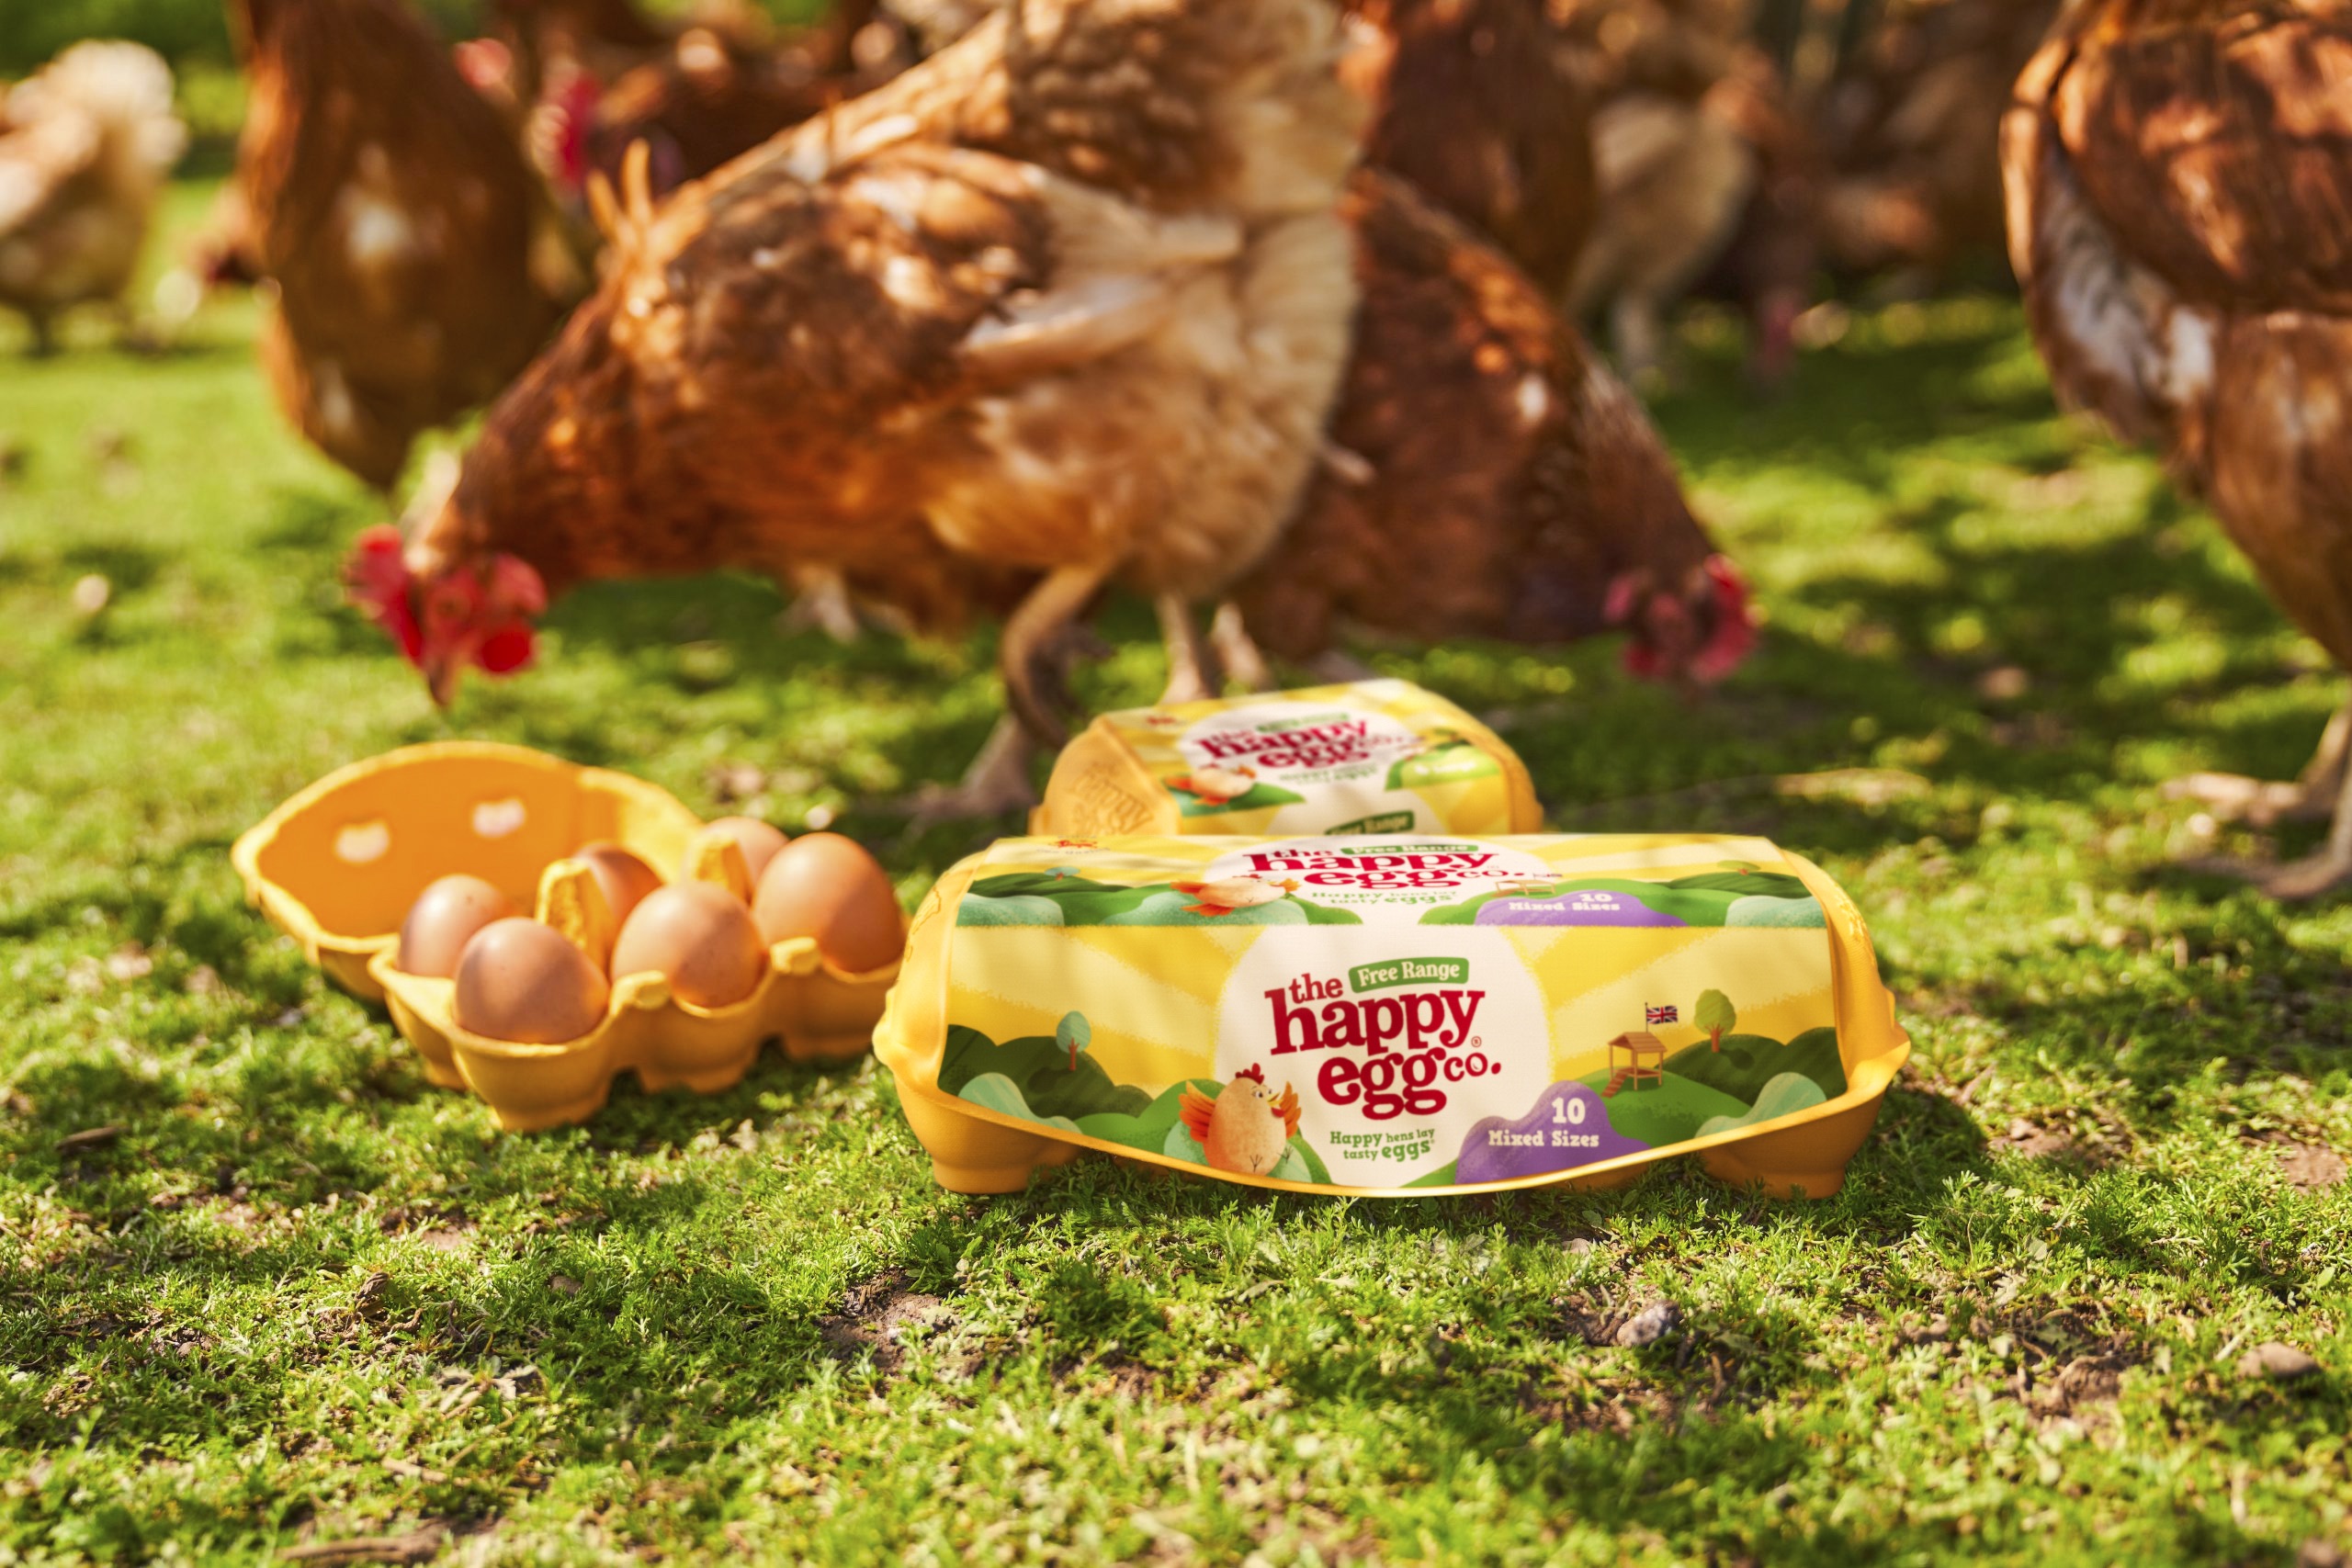 Brandon Helps Celebrate Animal Welfare in a New Visual Identity for the Uk’s Number One Egg Brand